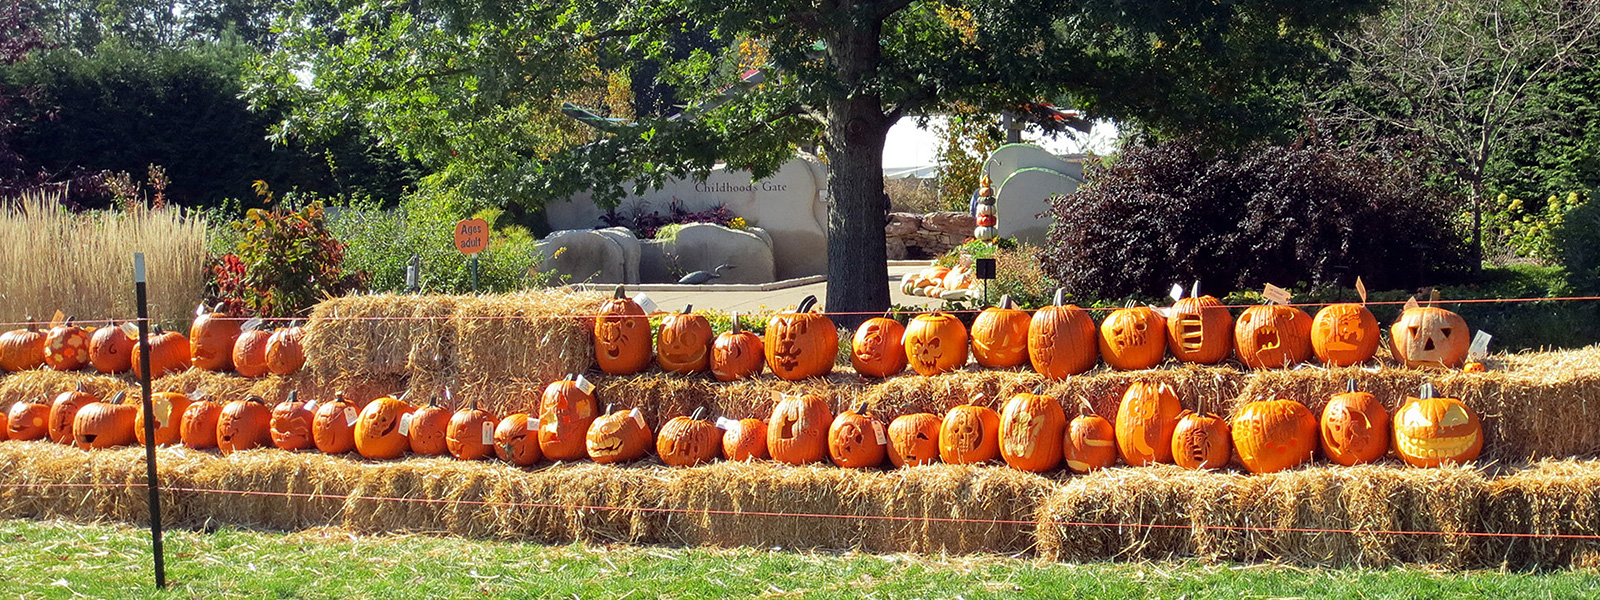 Carved pumpkins sit in a line on bales of straw